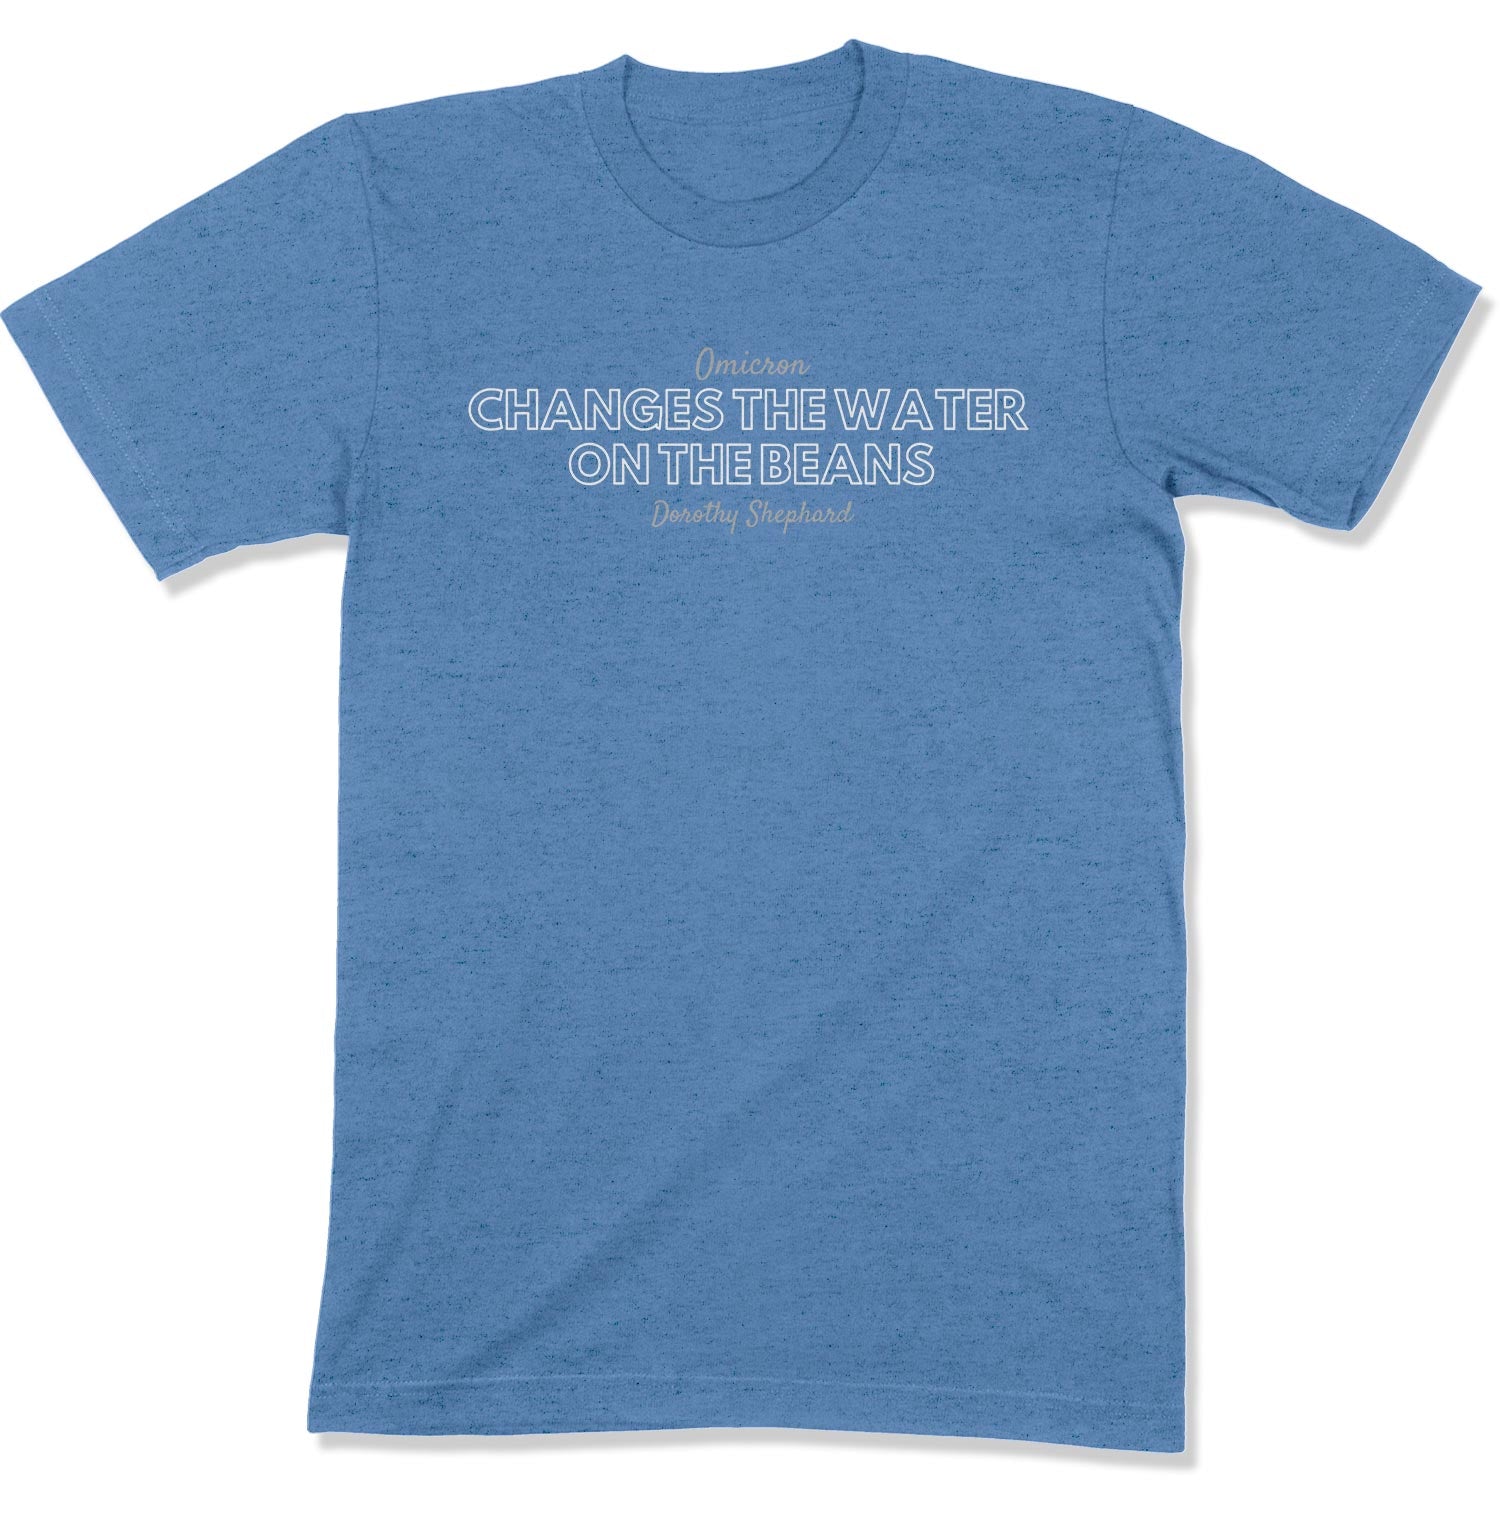 Omicron Changes the Water on the Beans Unisex T-Shirt-East Coast AF Apparel